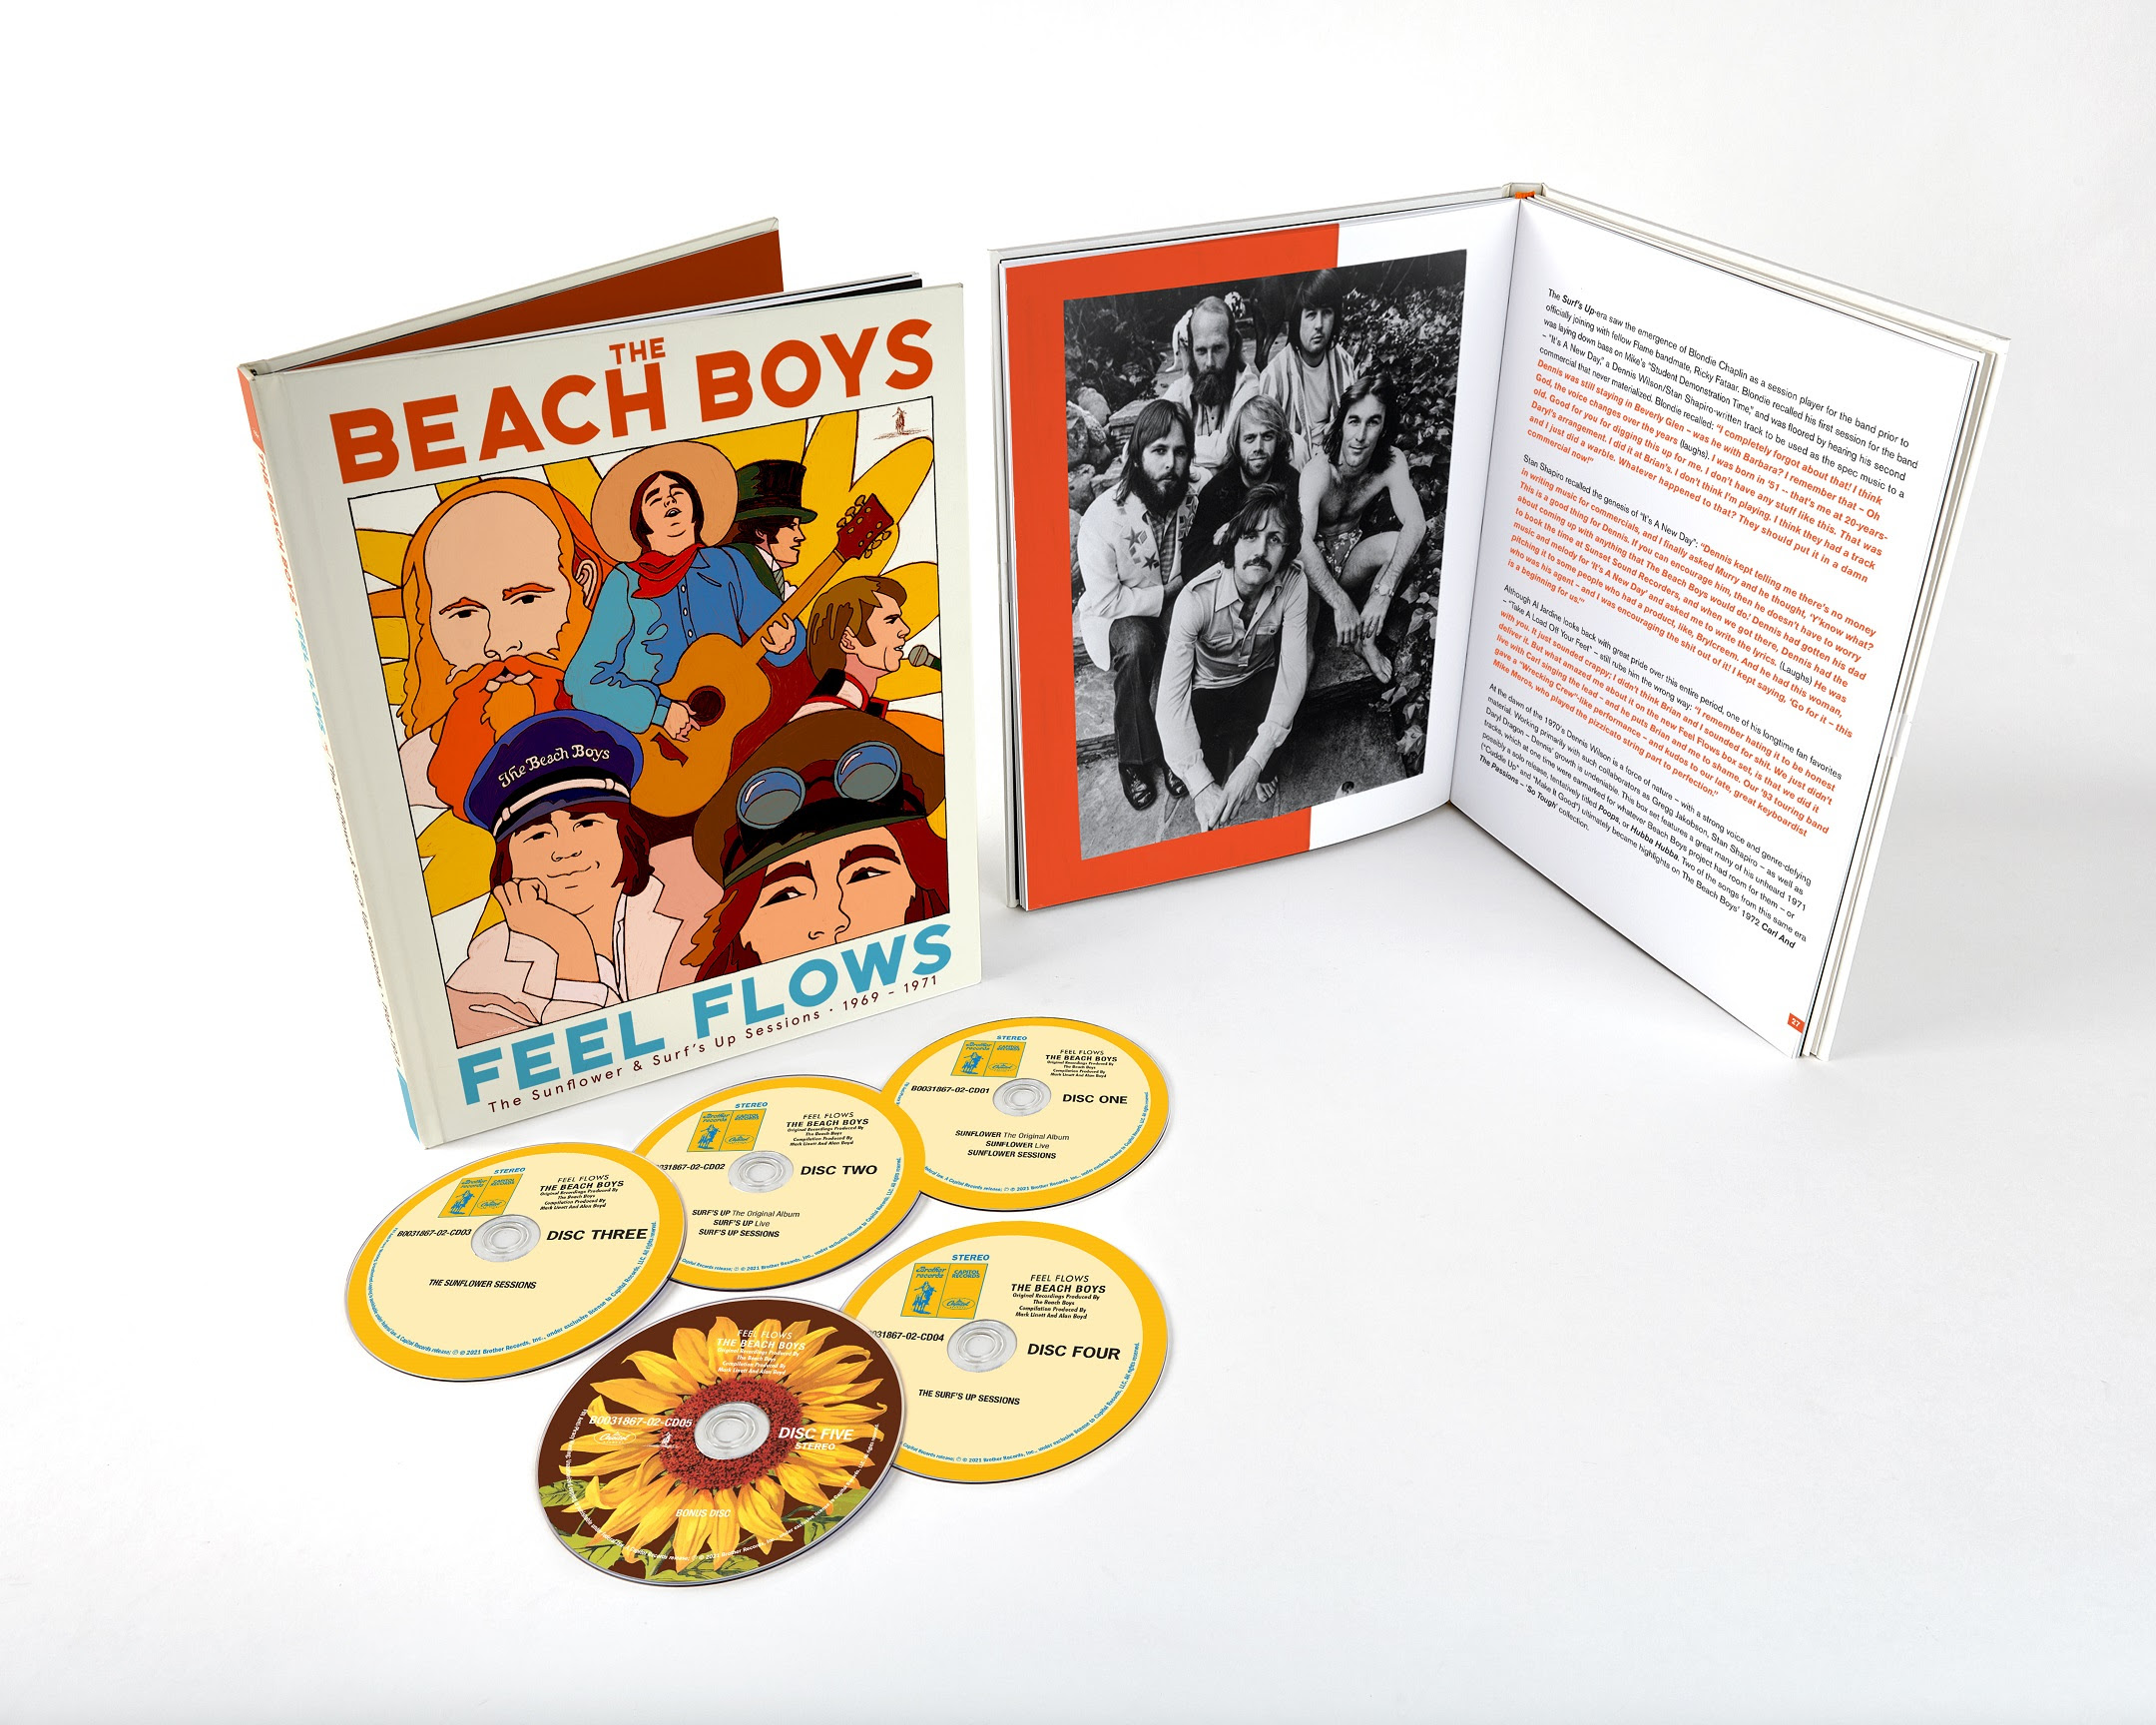 FEEL FLOWS – THE SUNFLOWER AND SURF’S UP SESSIONS 1969-1971